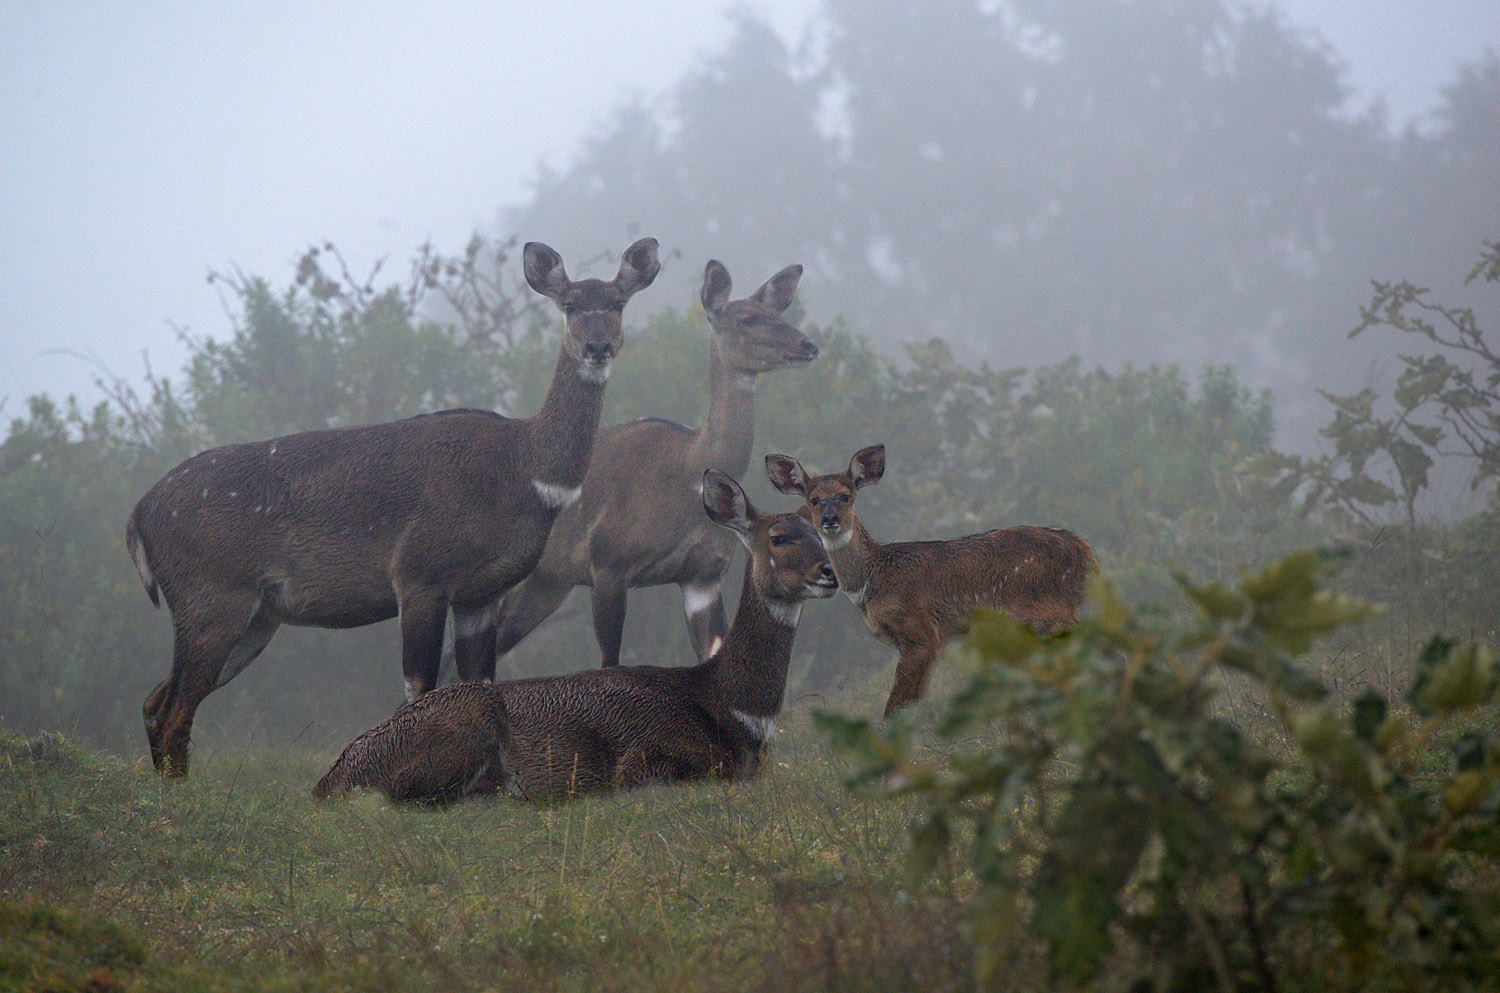 females Mountain Nyalas with a cub, Dinsho forest